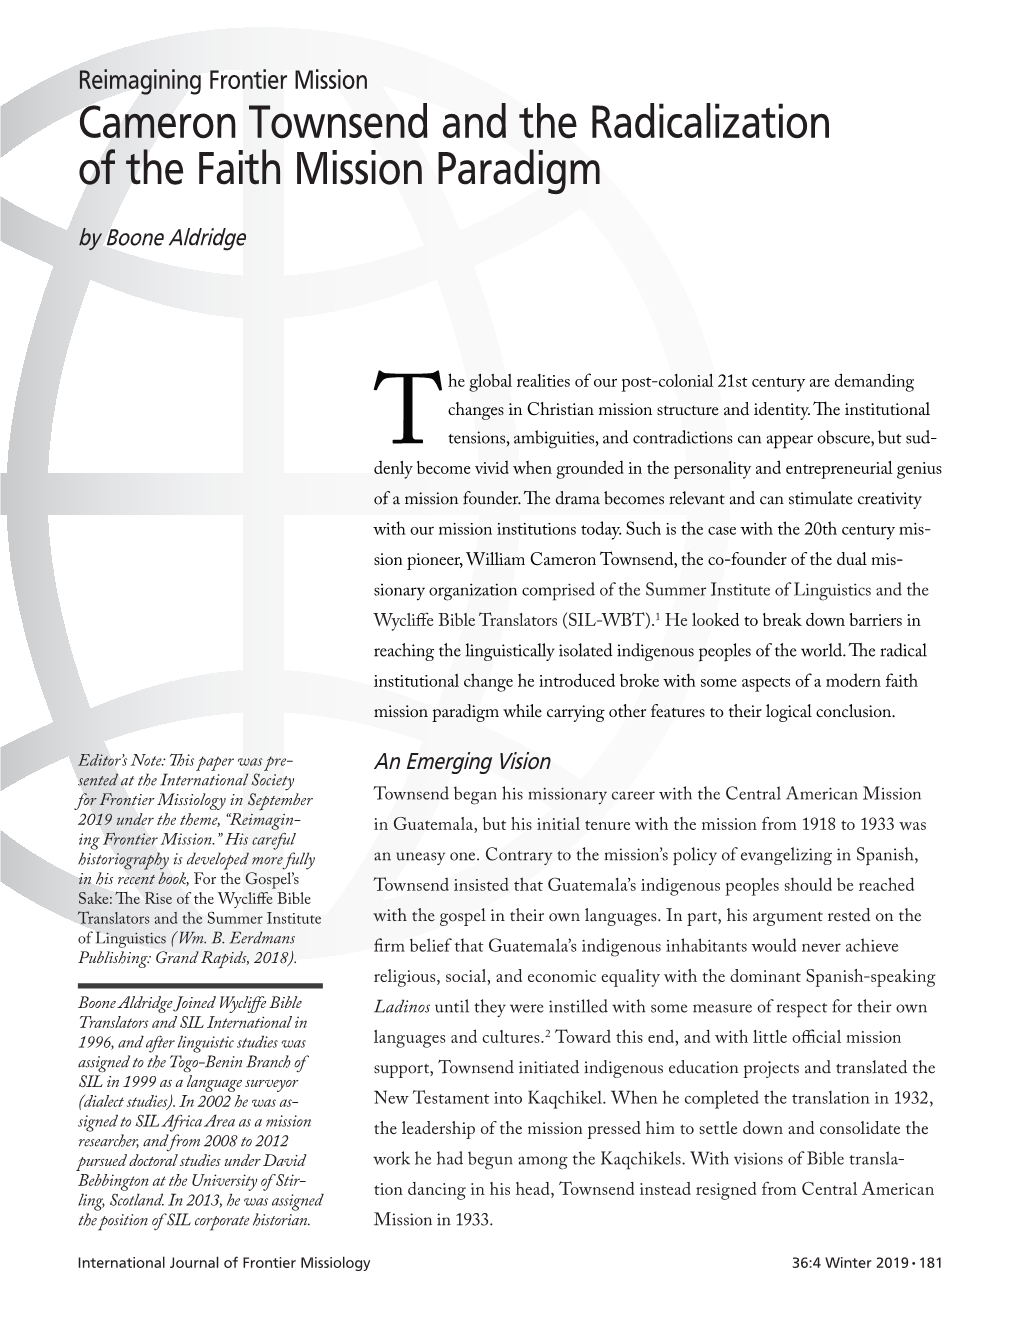 Cameron Townsend and the Radicalization of the Faith Mission Paradigm by Boone Aldridge